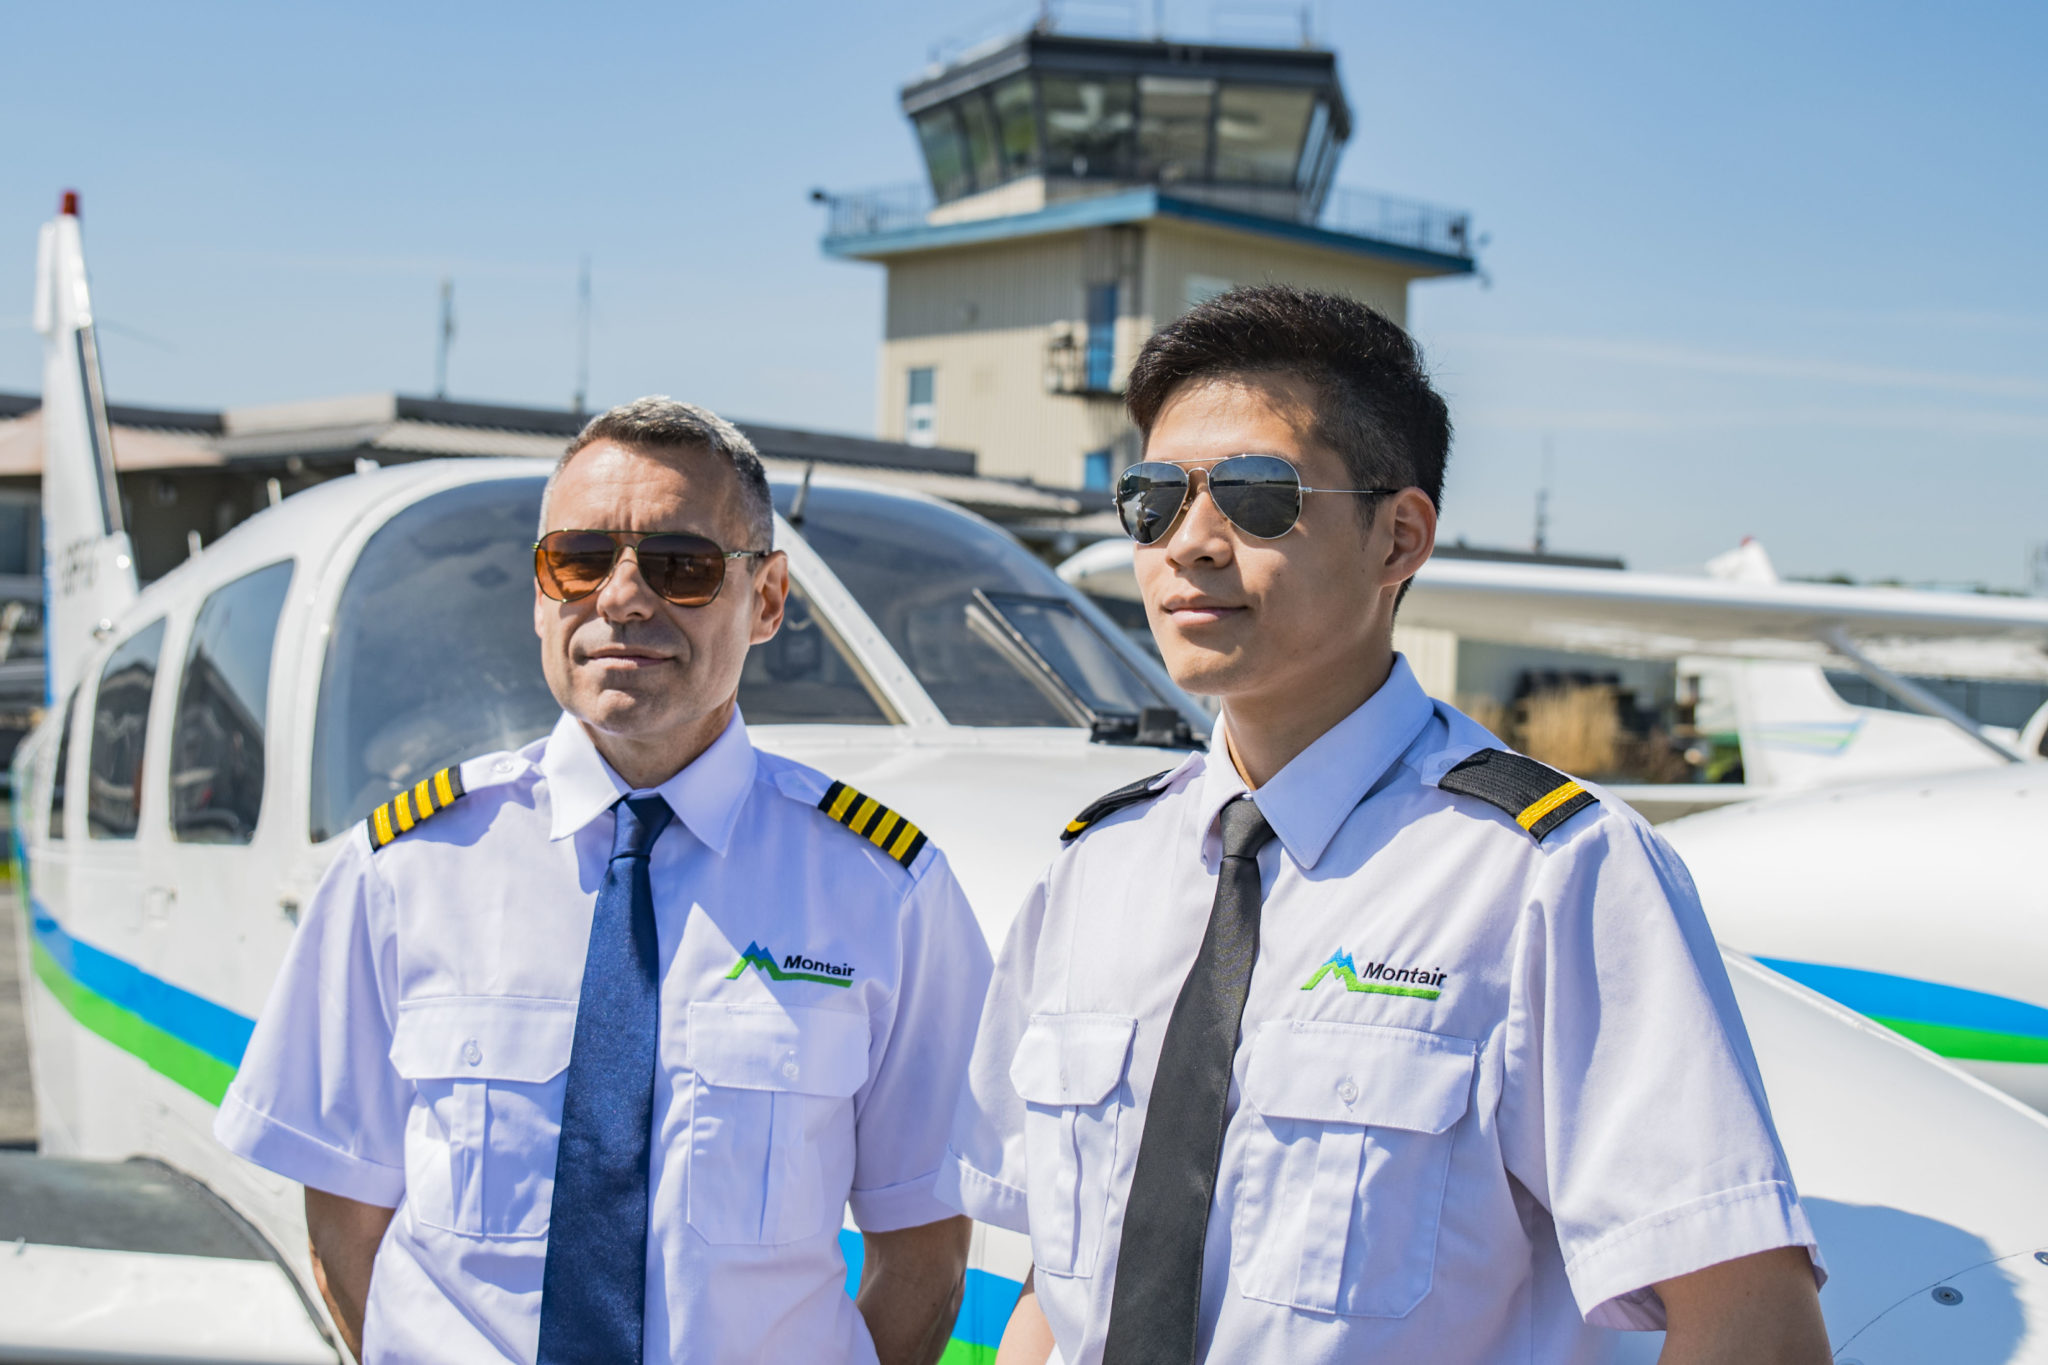 Flight instructor and student in airport